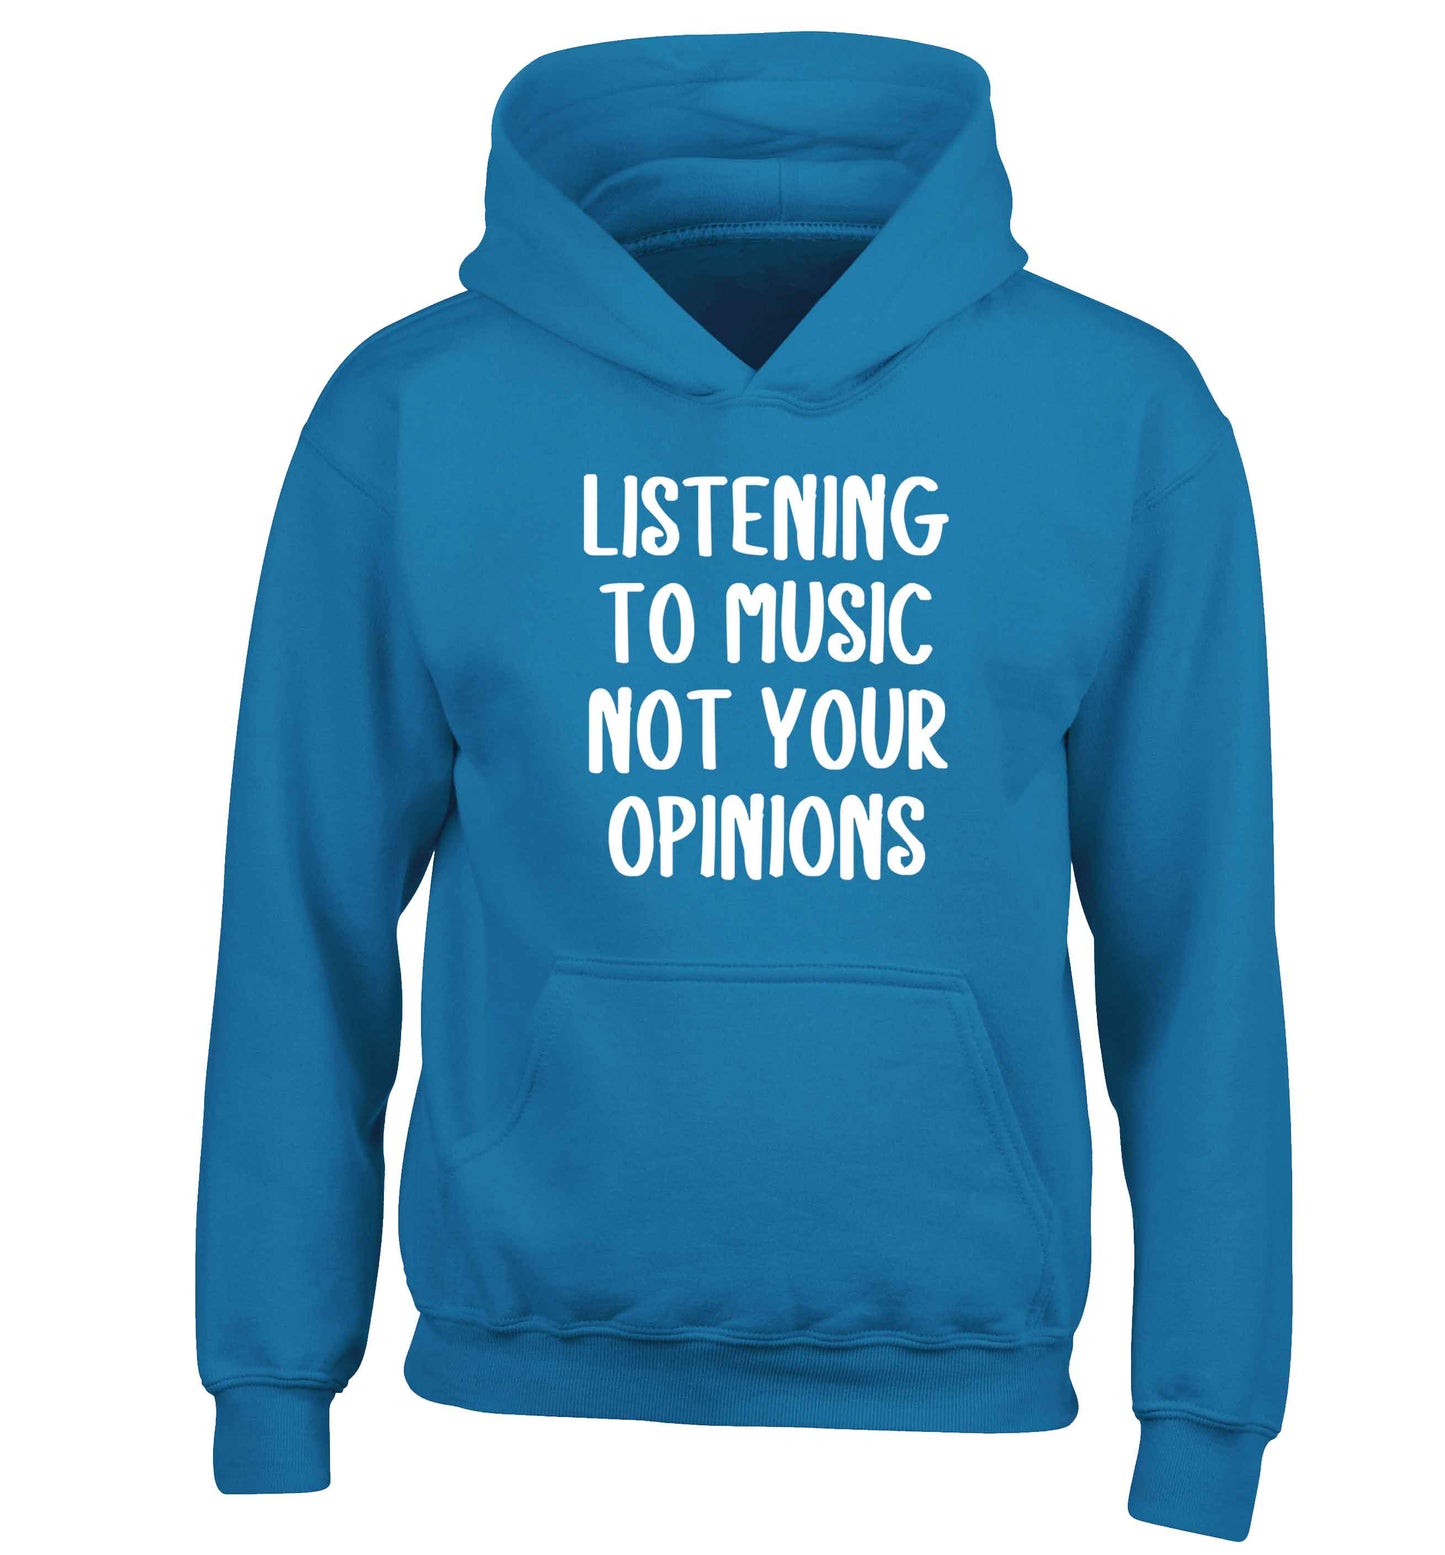 Listening to music not your opinions children's blue hoodie 12-13 Years